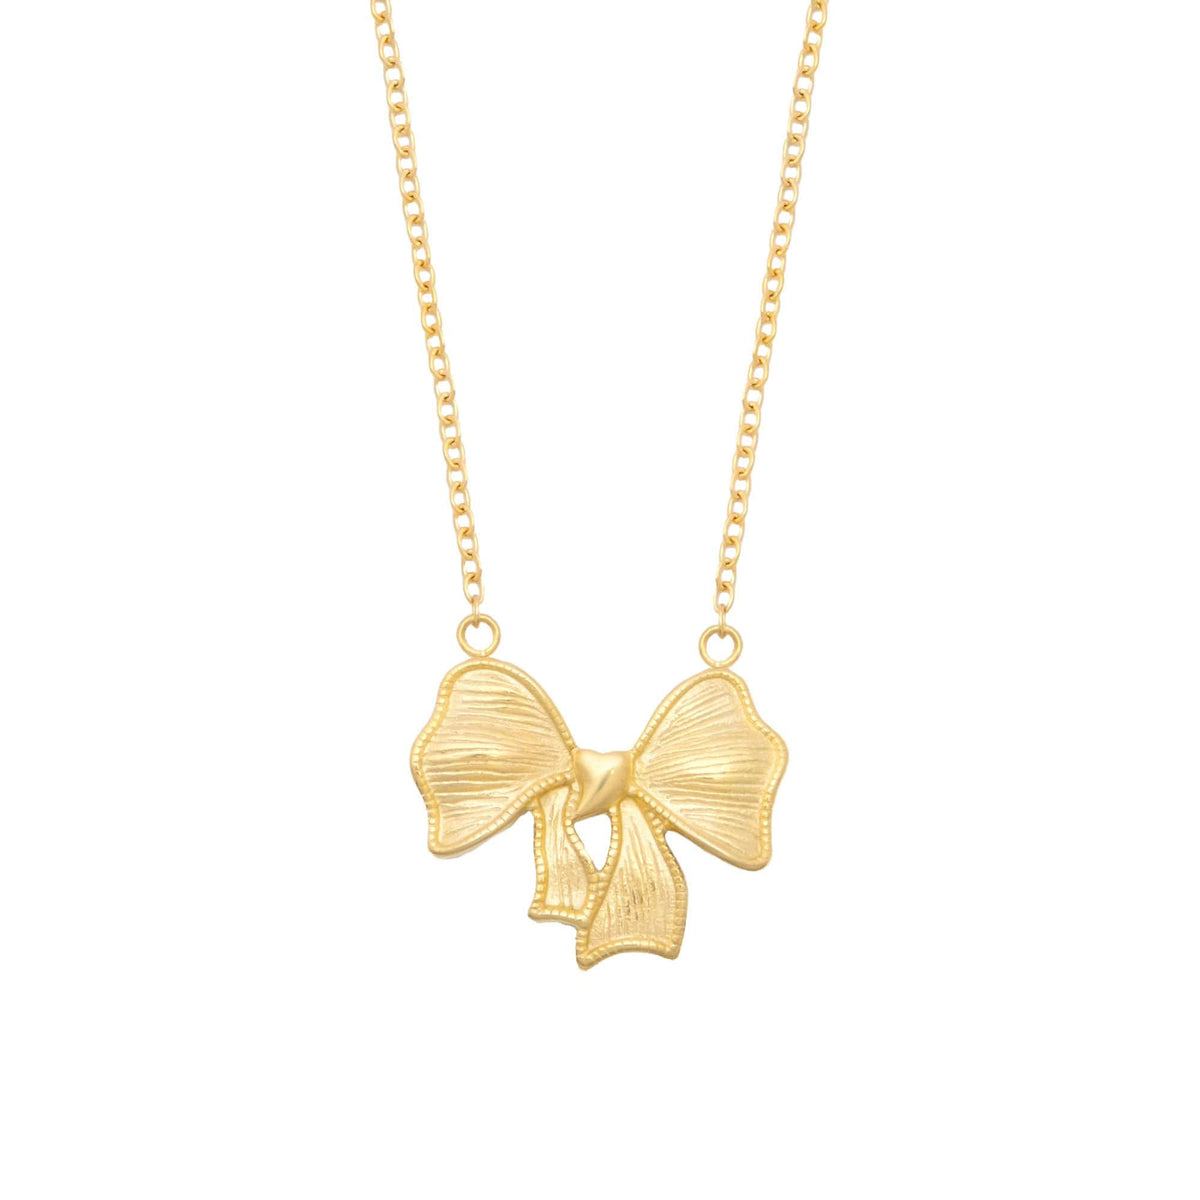 Bohomoon Stainless Steel Marci Bow Necklace